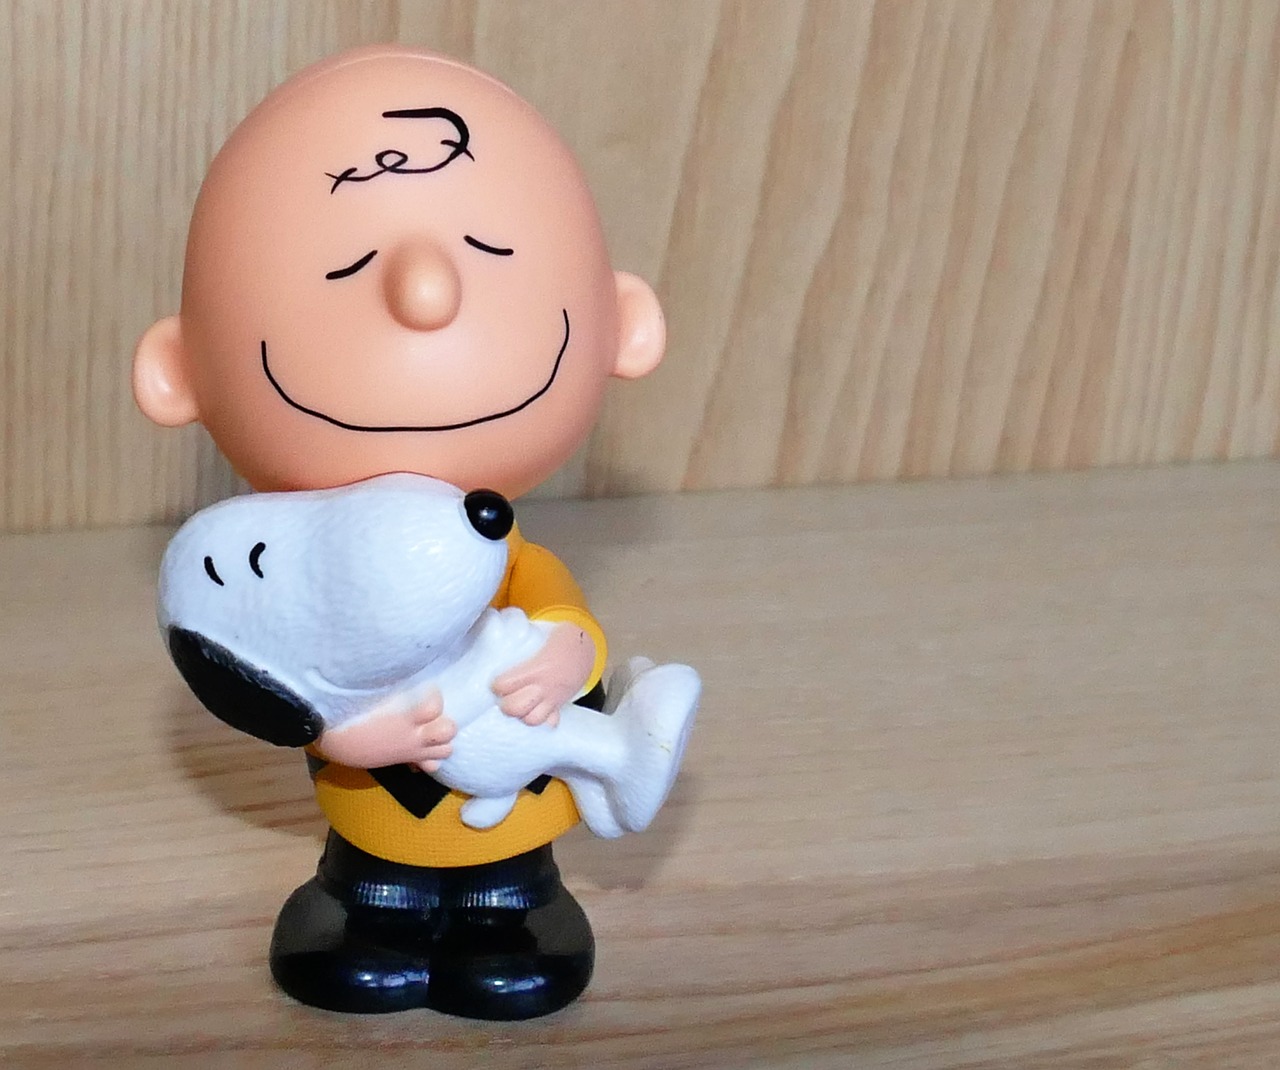 charlie brown snoopy toys free photo